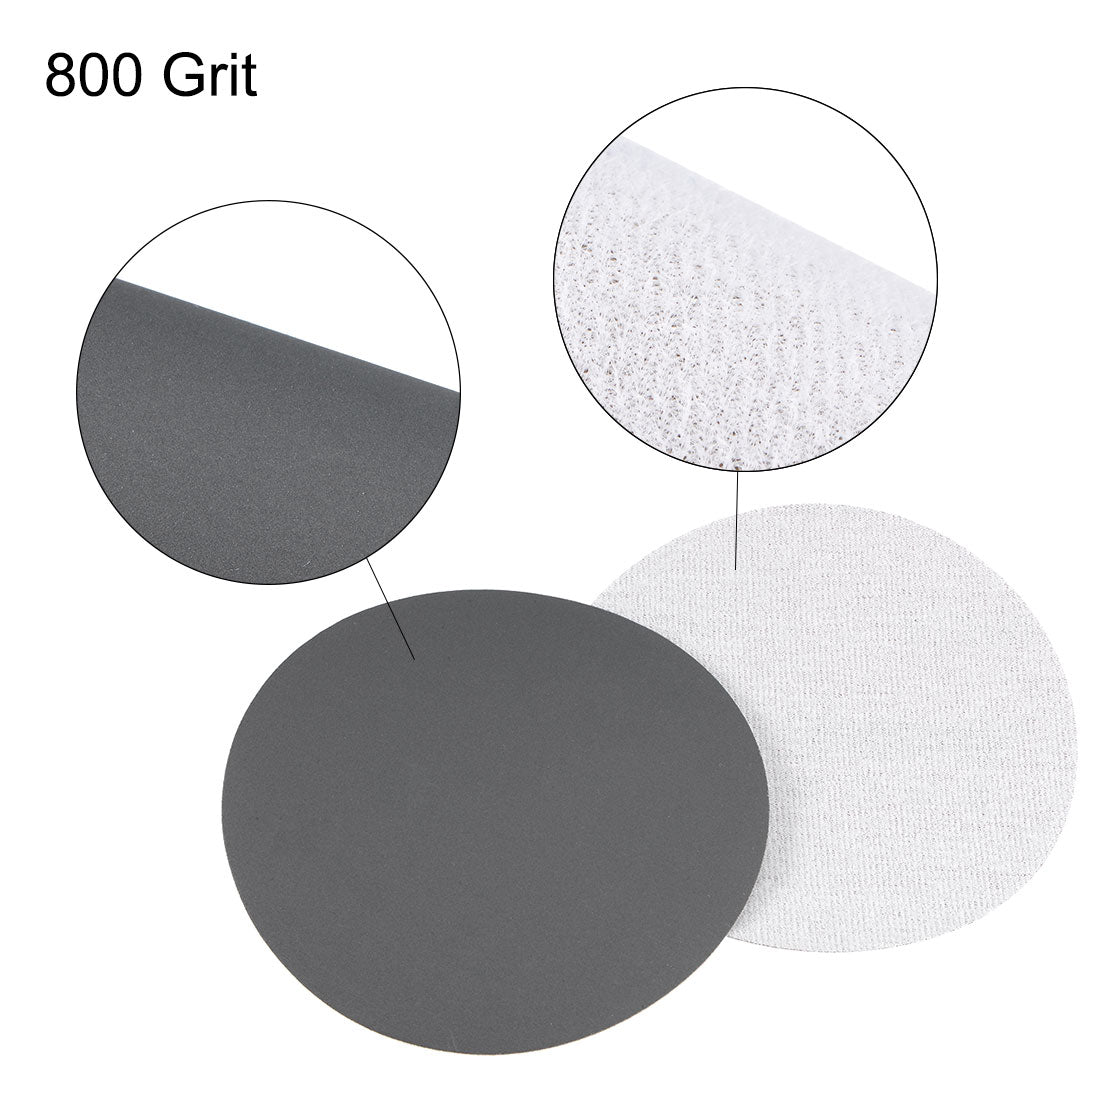 Uxcell Uxcell 5 inch Wet Dry Disc 2500 Grit Hook and Loop Sanding Disc Silicon Carbide 5pcs